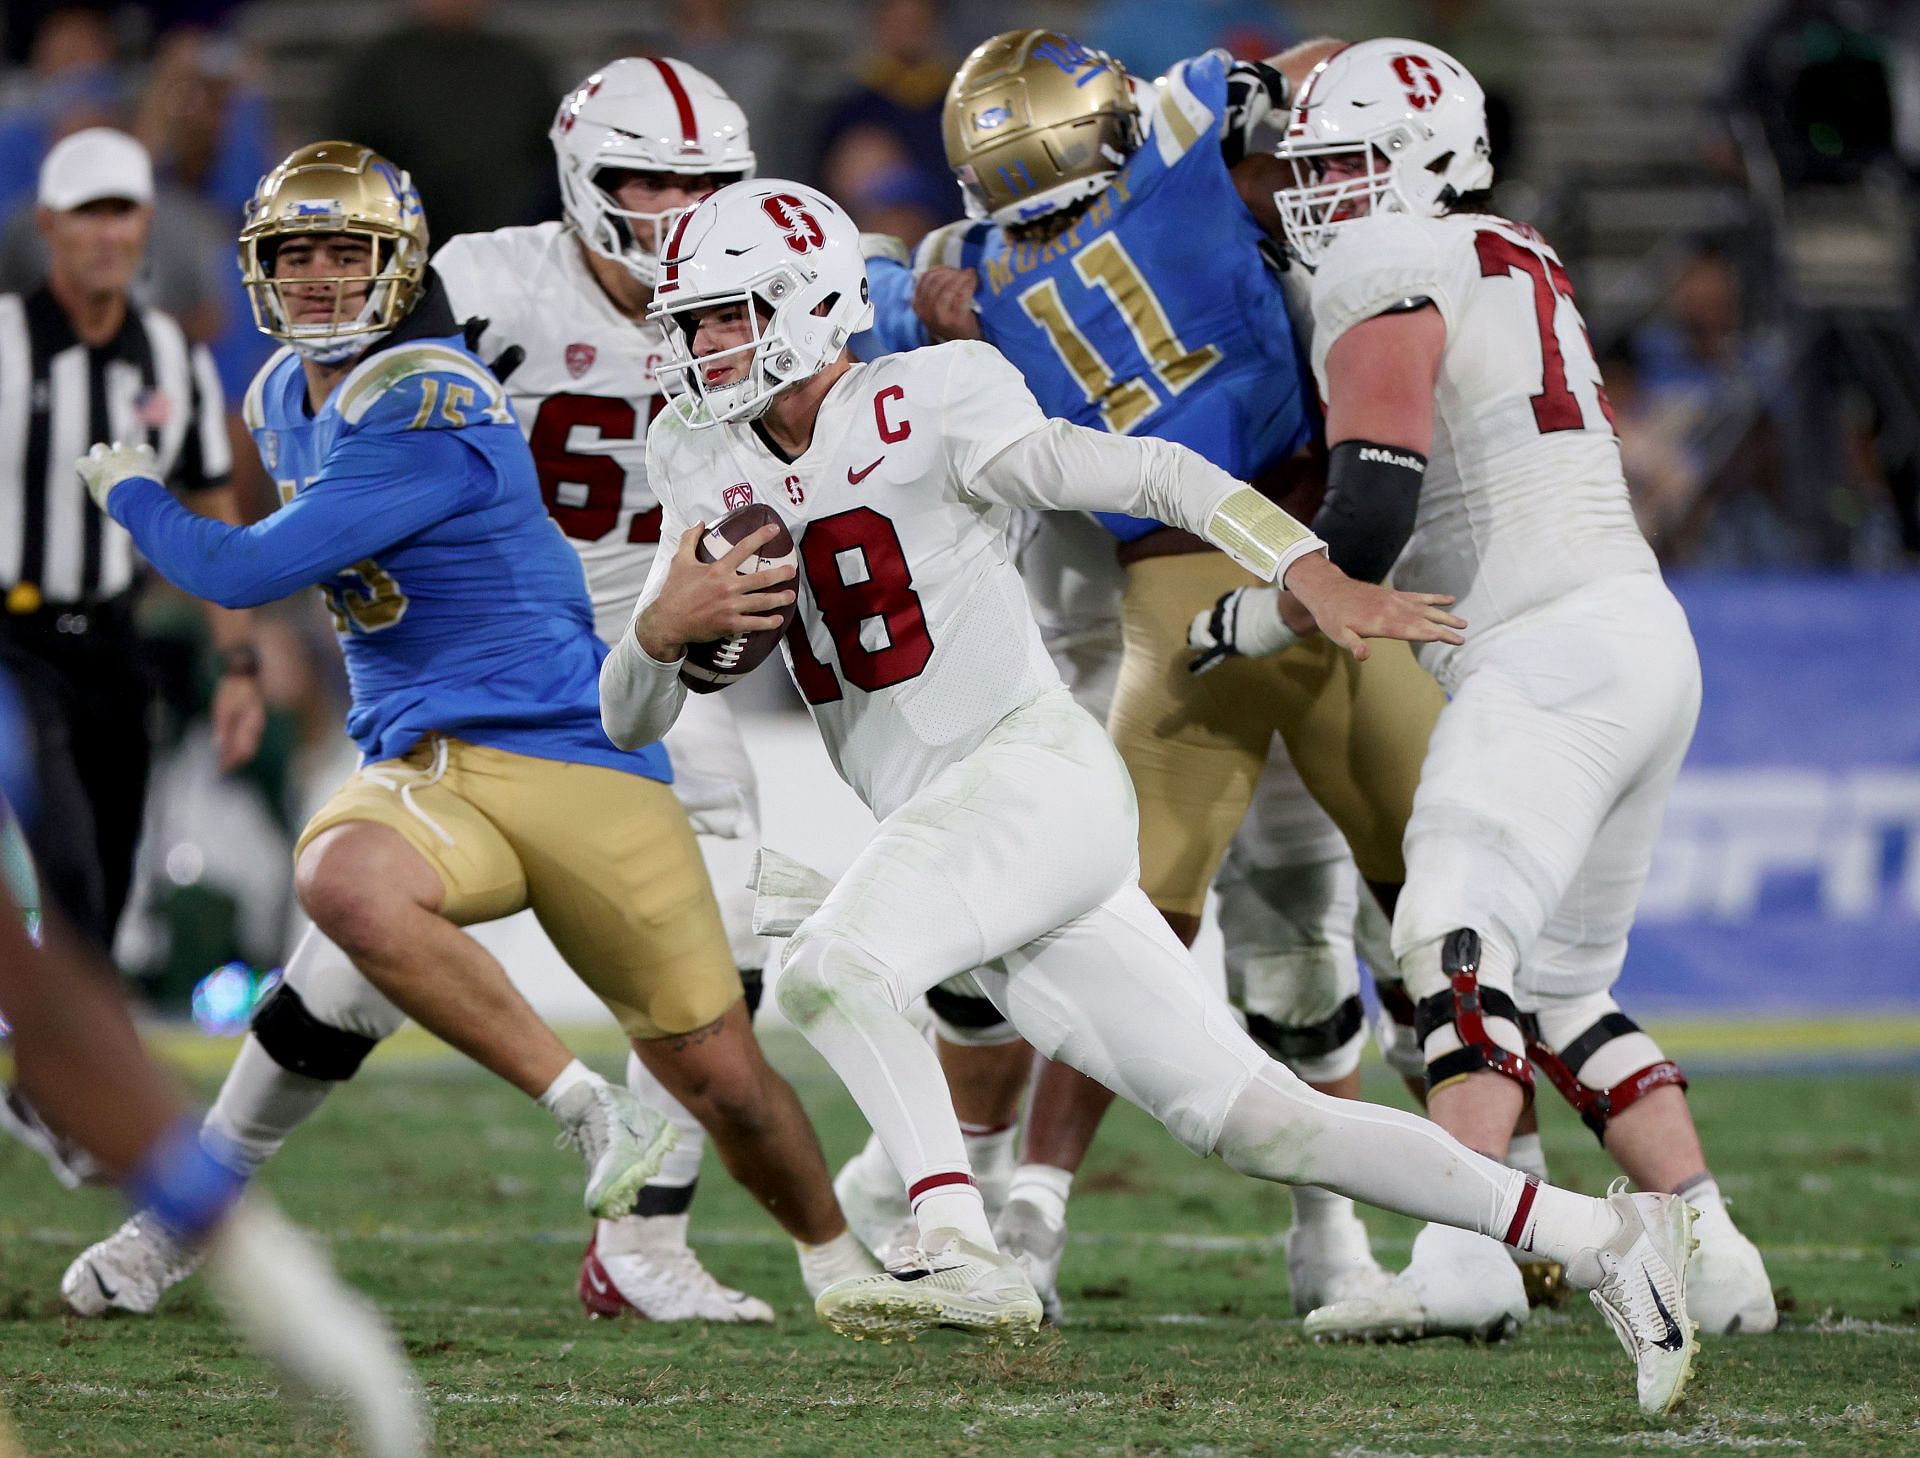 Tanner Mckee 2023 Nfl Draft Profile Scout Report For The Stanford Qb 